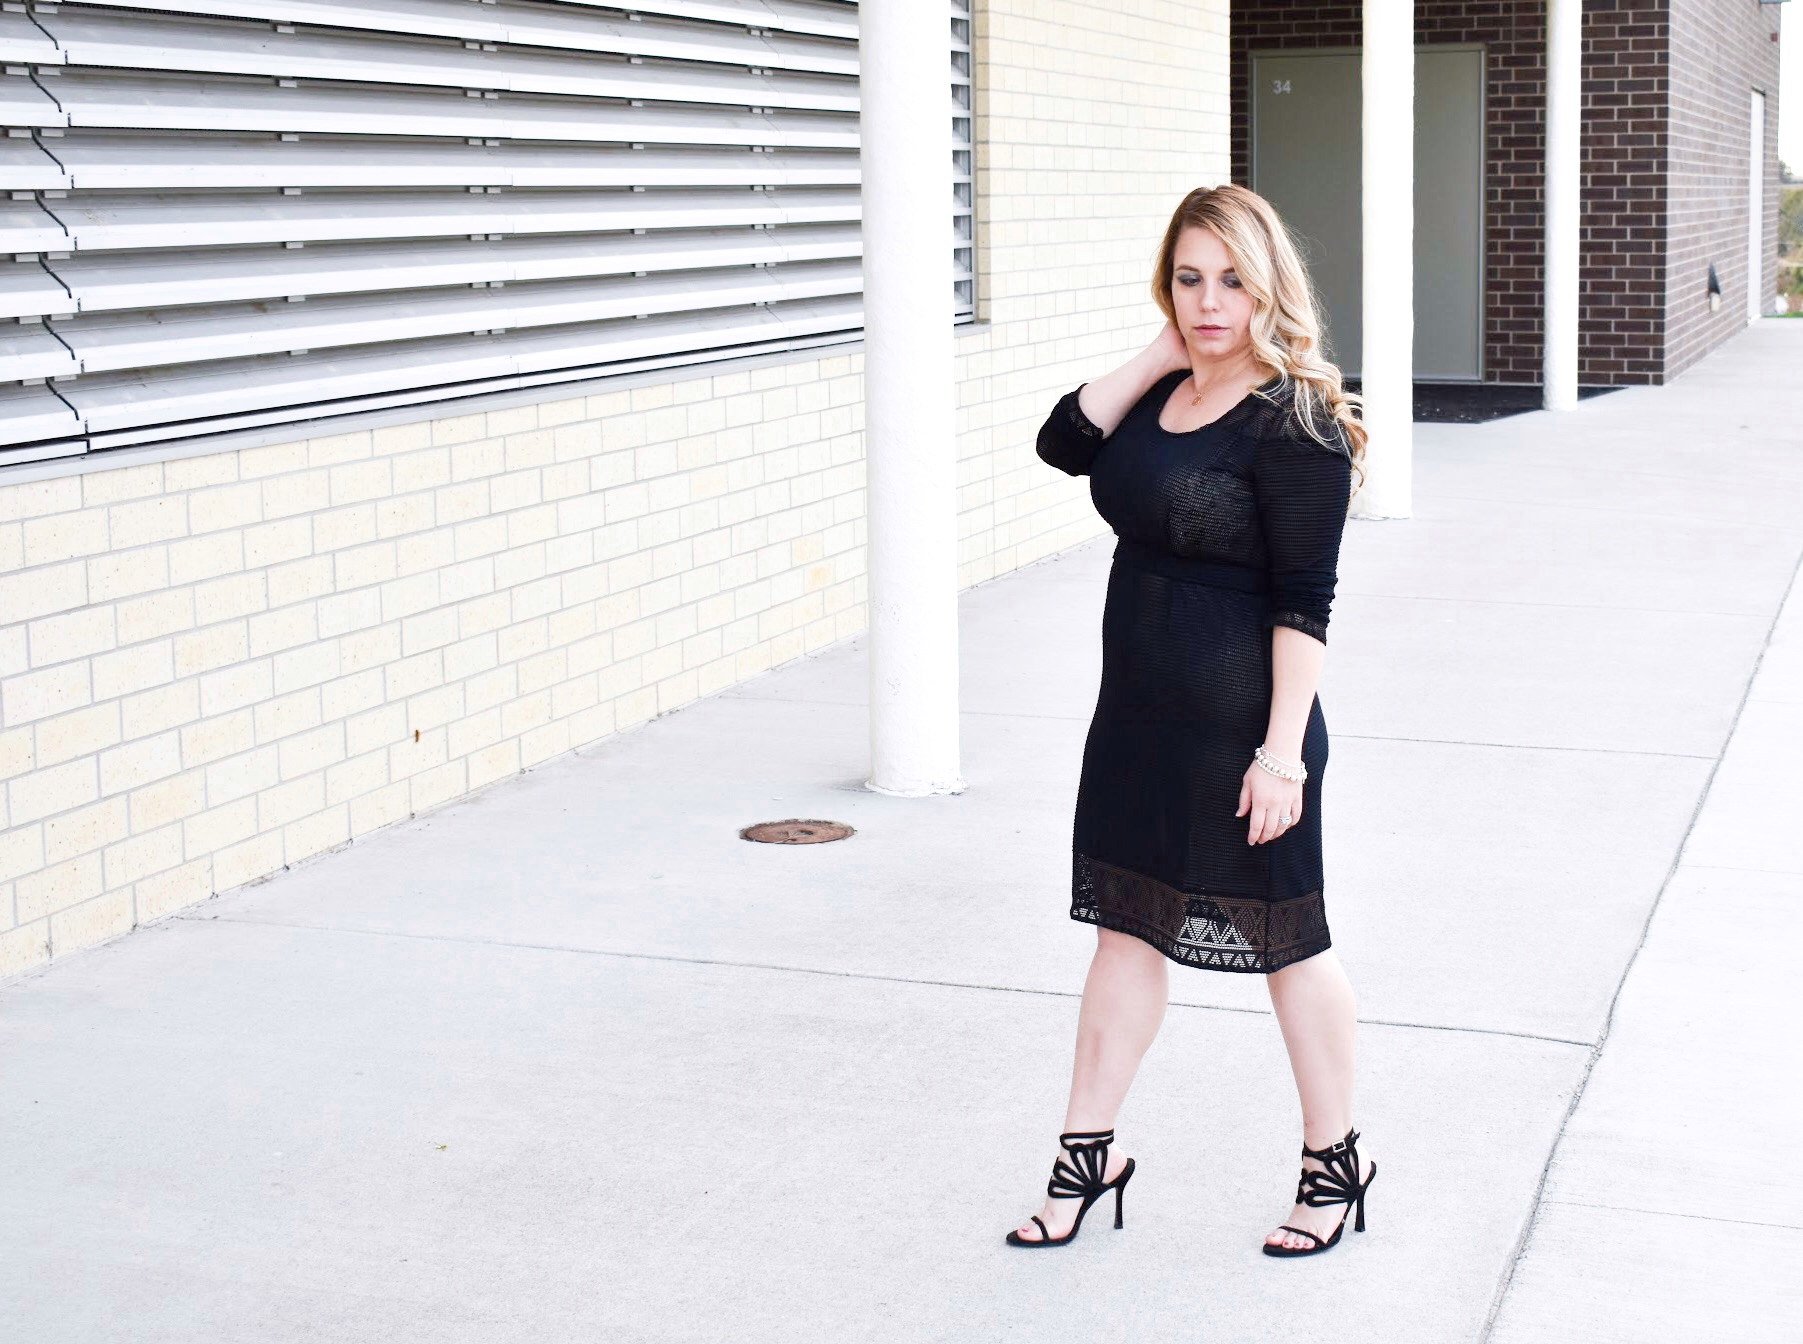 Looking for holiday clothes for breastfeeding moms? Finding a nursing-friendly holiday dress to wear for Christmas parties and other events can be a challenge. Here's the perfect little black dress for breastfeeding moms to wear during the holidays and beyond! Featuring a review of Vida Leche Amor breastfeeding clothes. [ad]